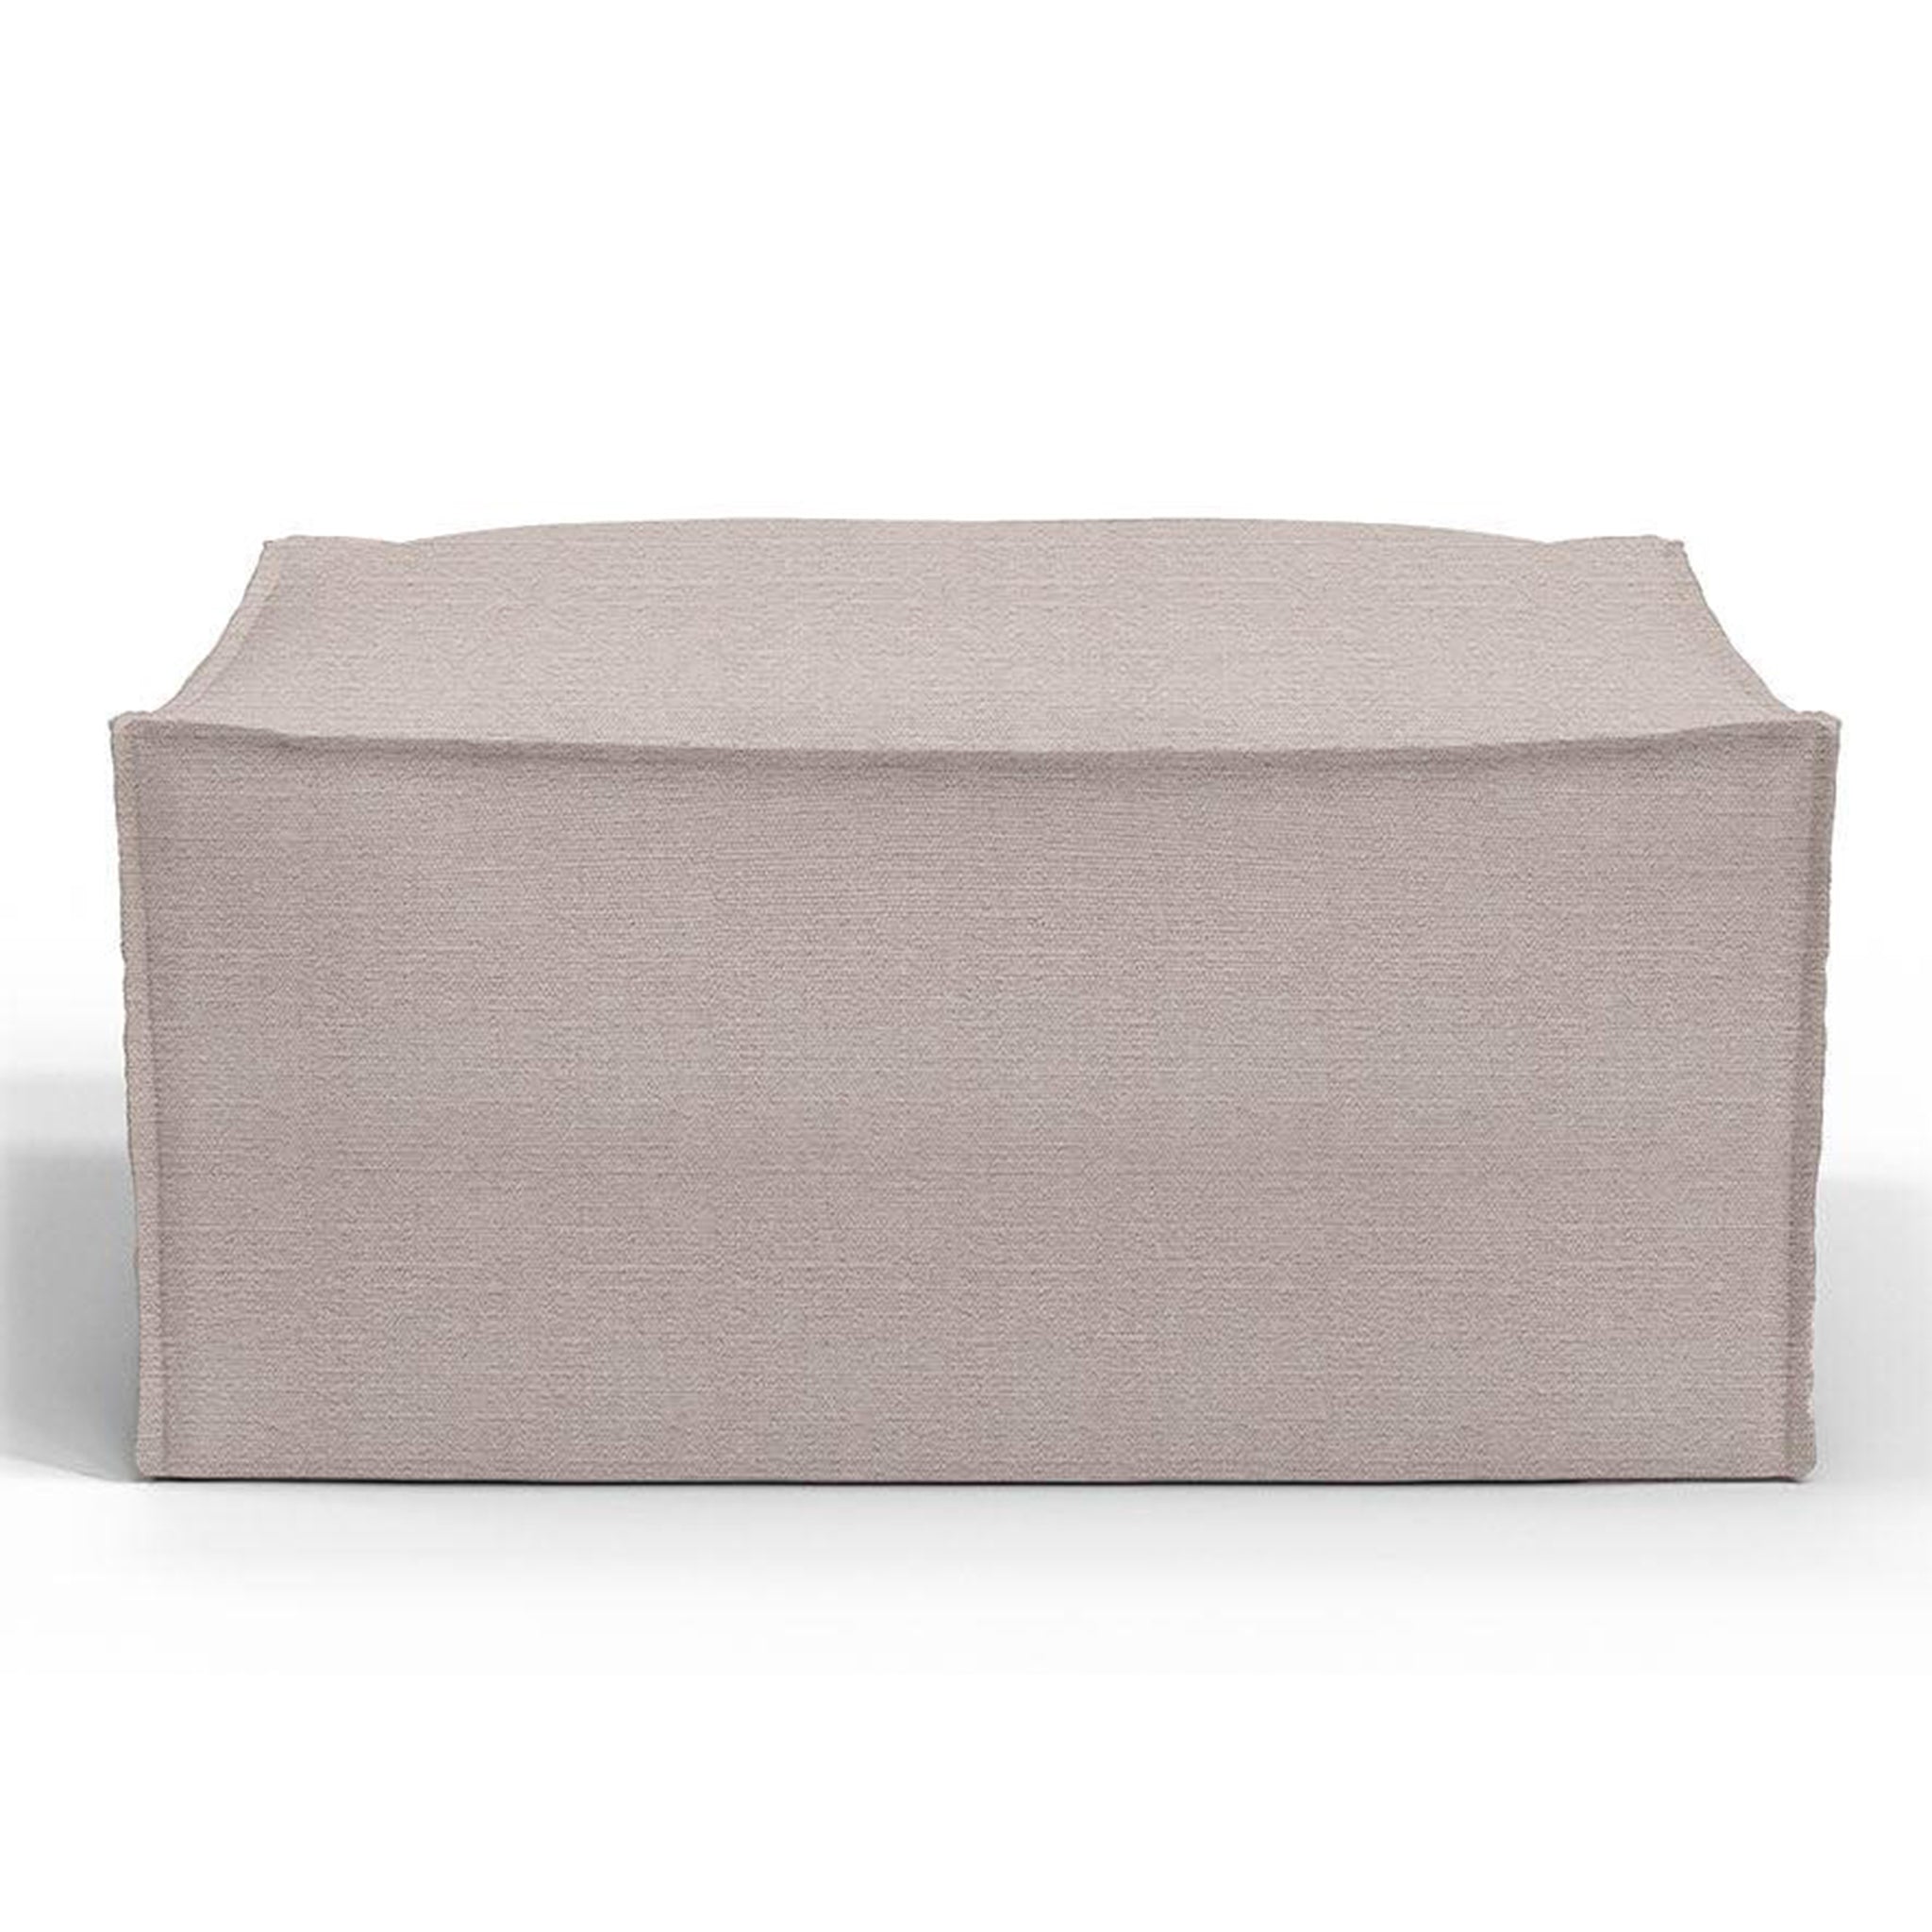 Mauve ottoman with a sleek, contemporary design, ideal for complementing any modern living room or lounge setup.